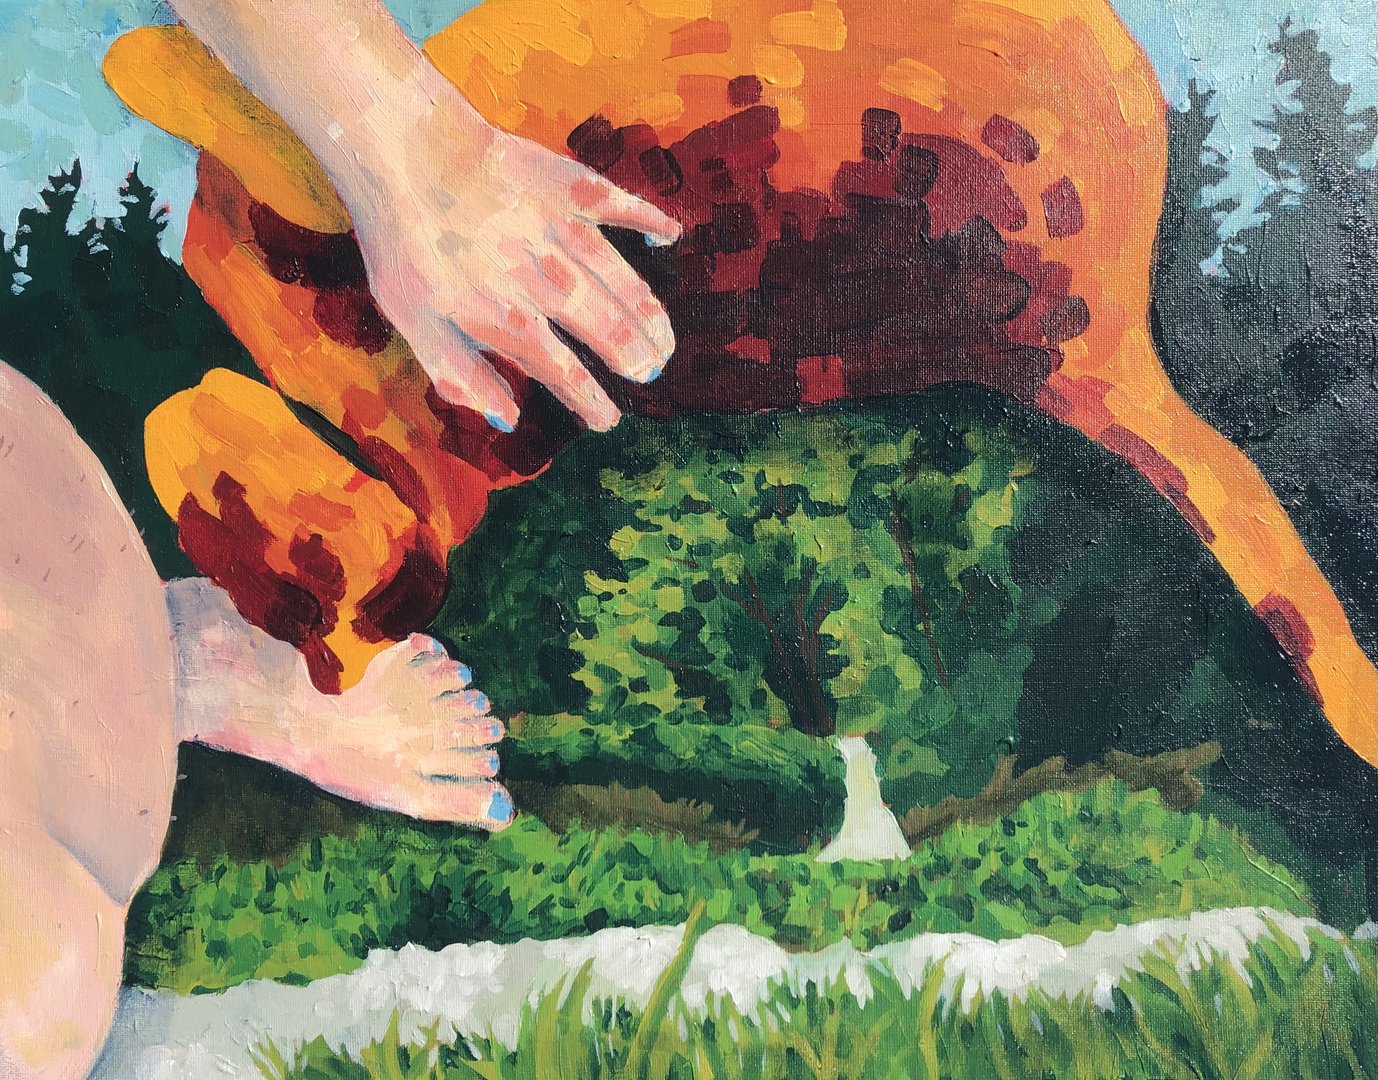 Acrylic painting of a human hand petting a cat set on top of a nature scene